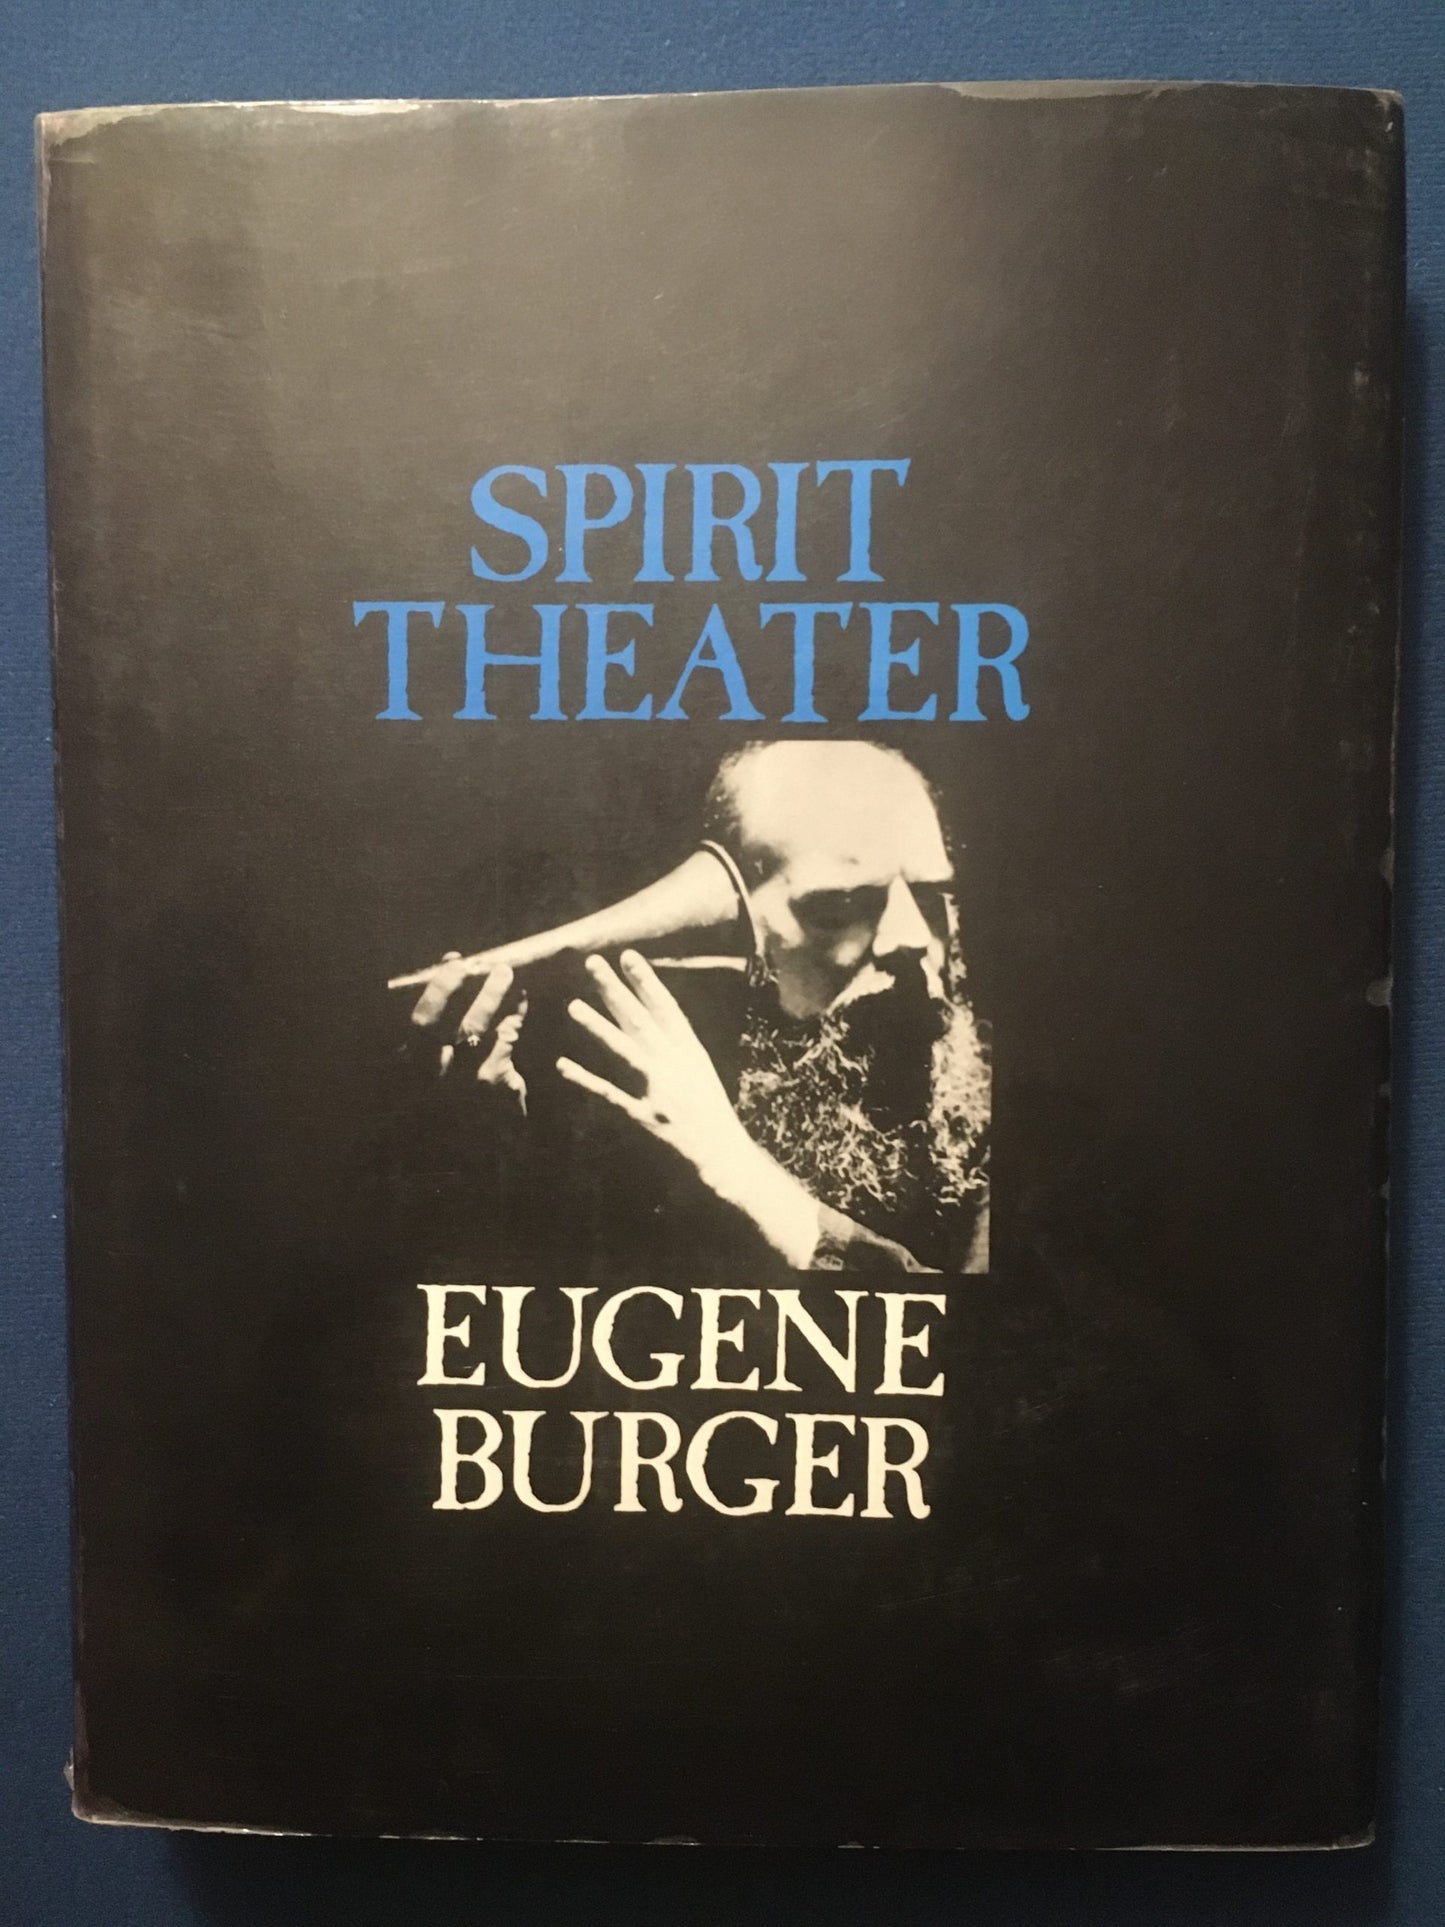 Spirit Theatre by Eugene Burger, Inscribed (includes record!)